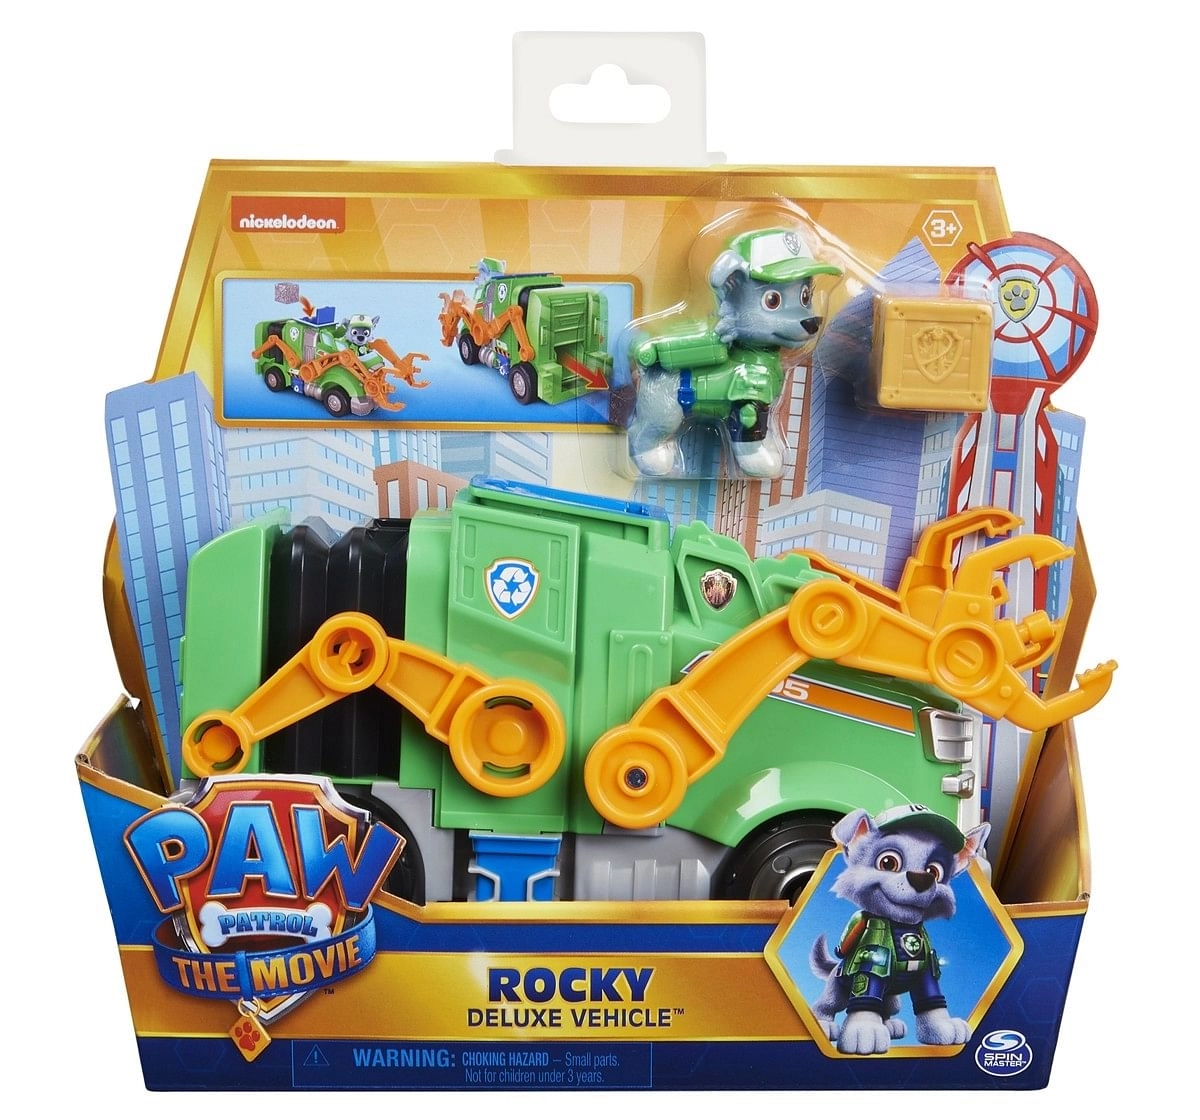 Paw Patrol Theme Vehicle Movie Rocky Chase Green 3Y+